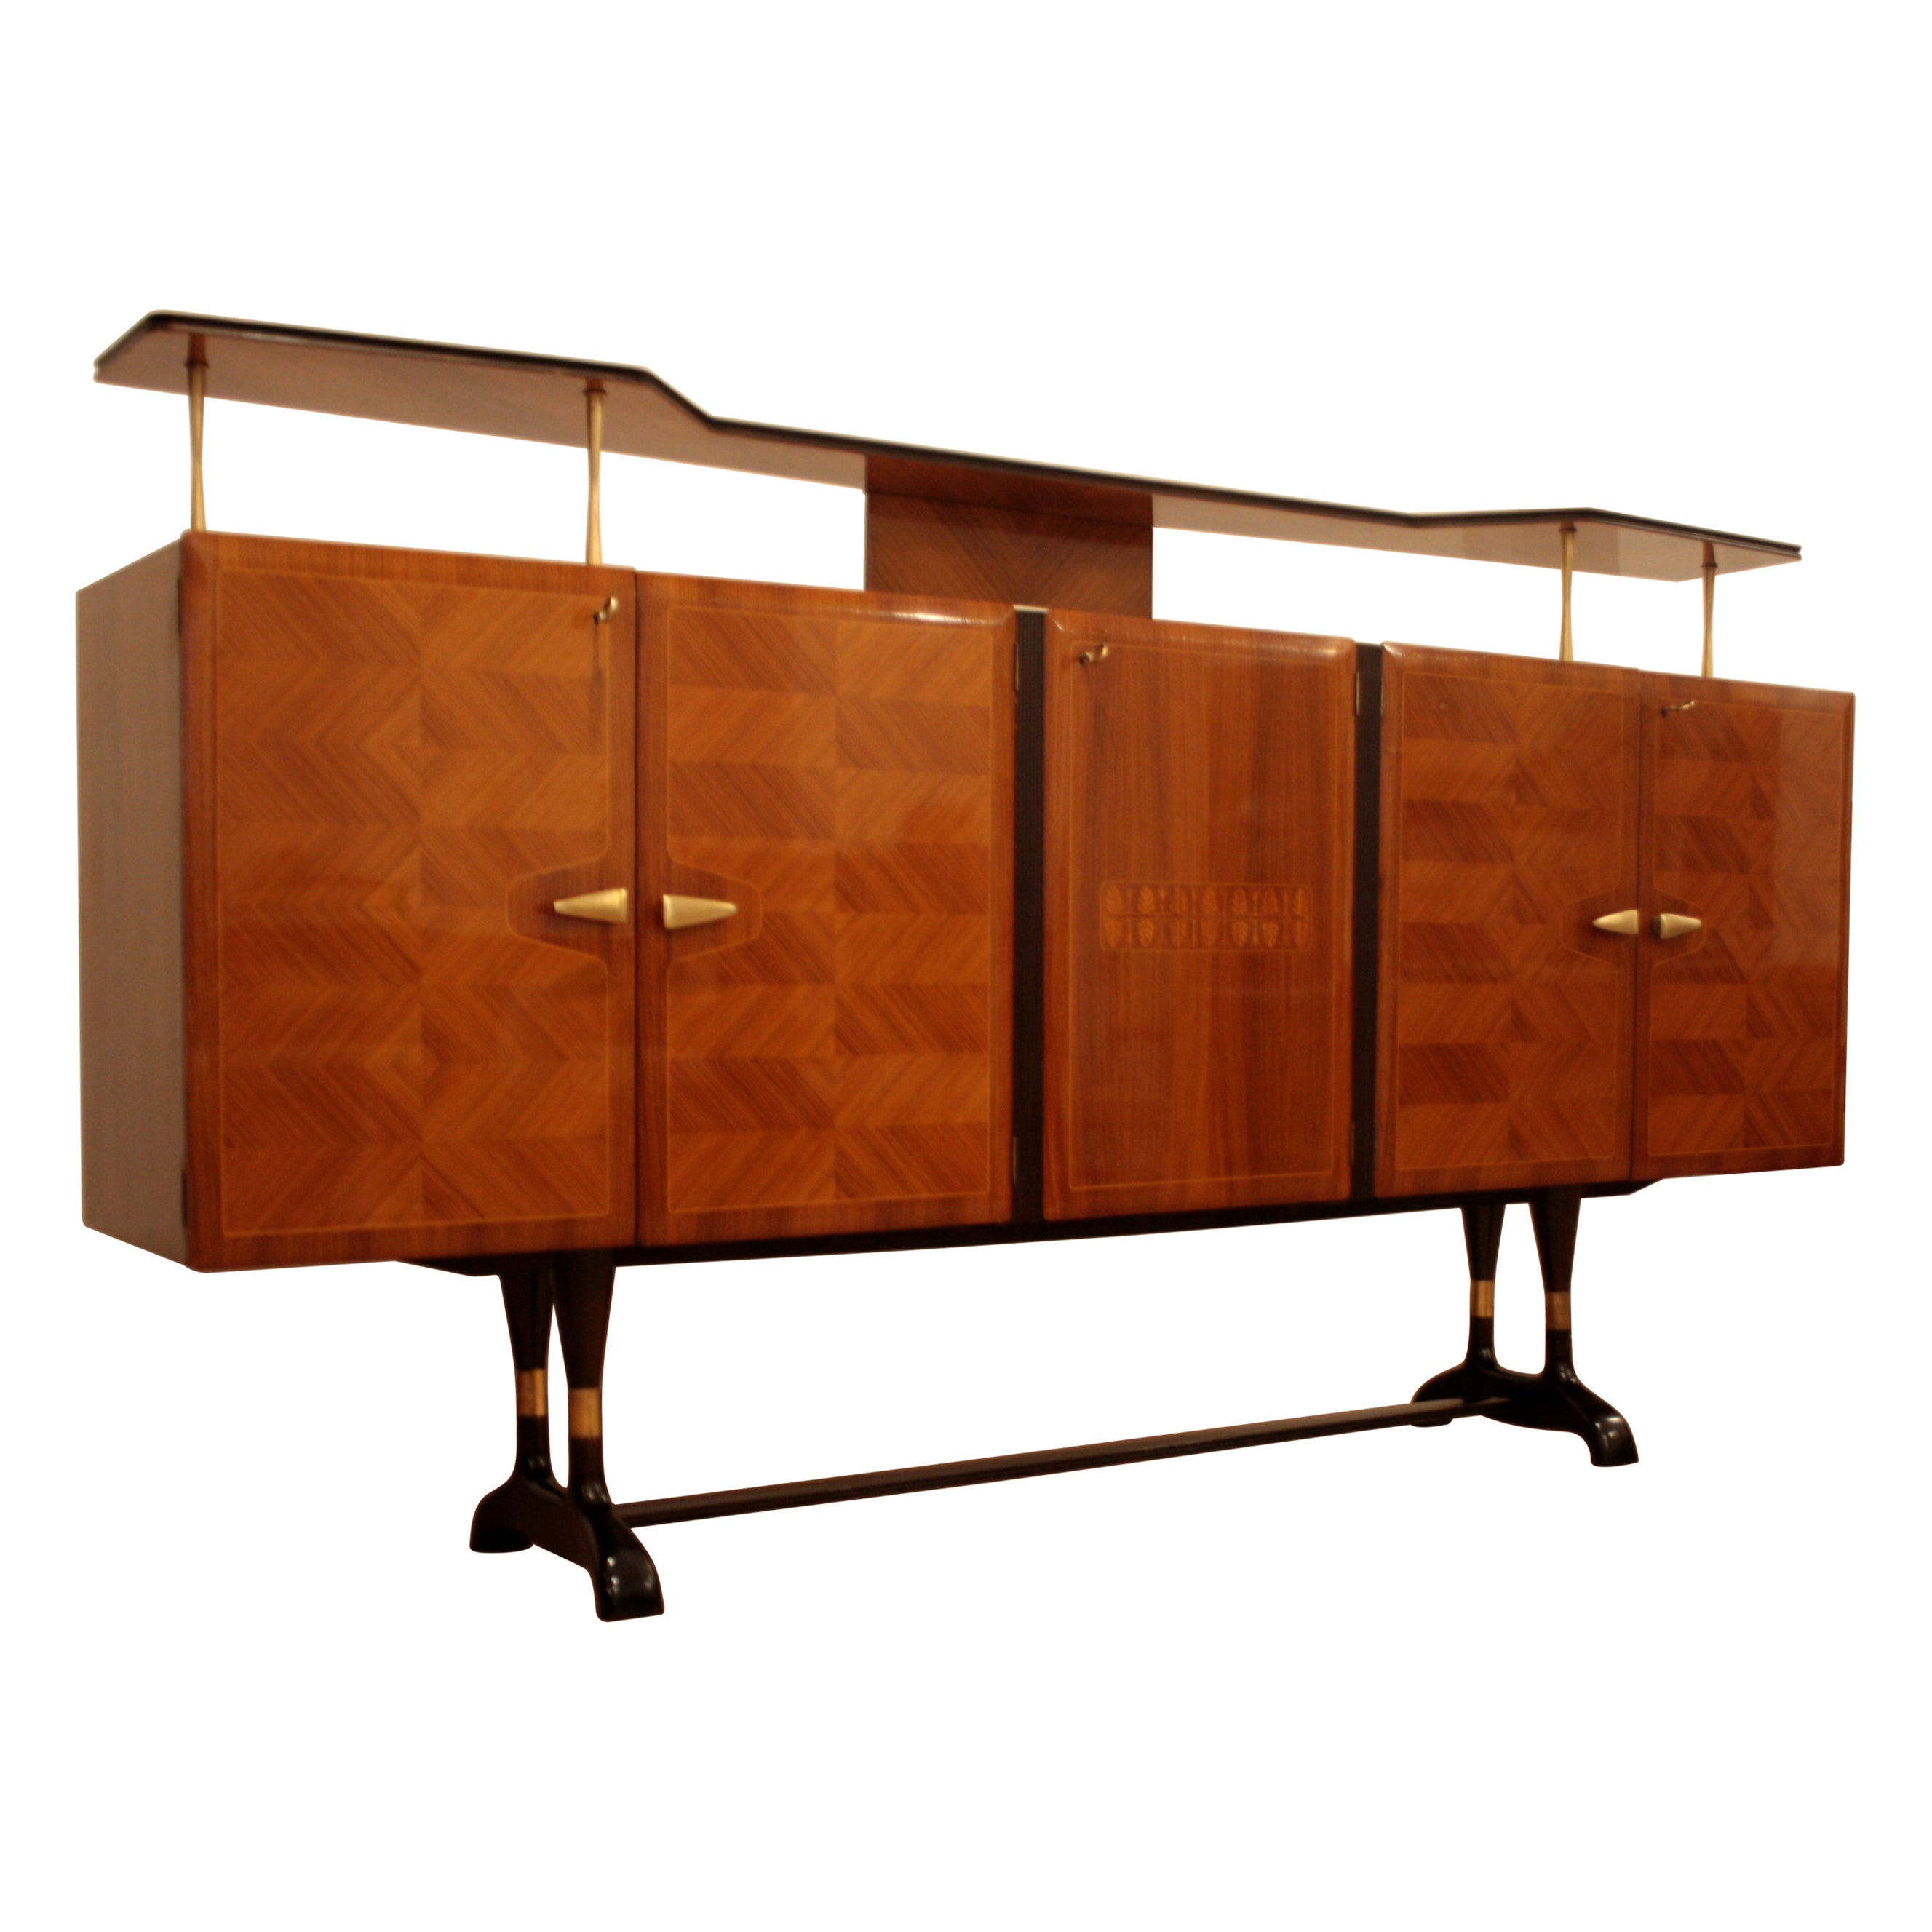 Middle 20th Century Sideboard by Vittorio Dassi for Cecchini Mid Century Modern